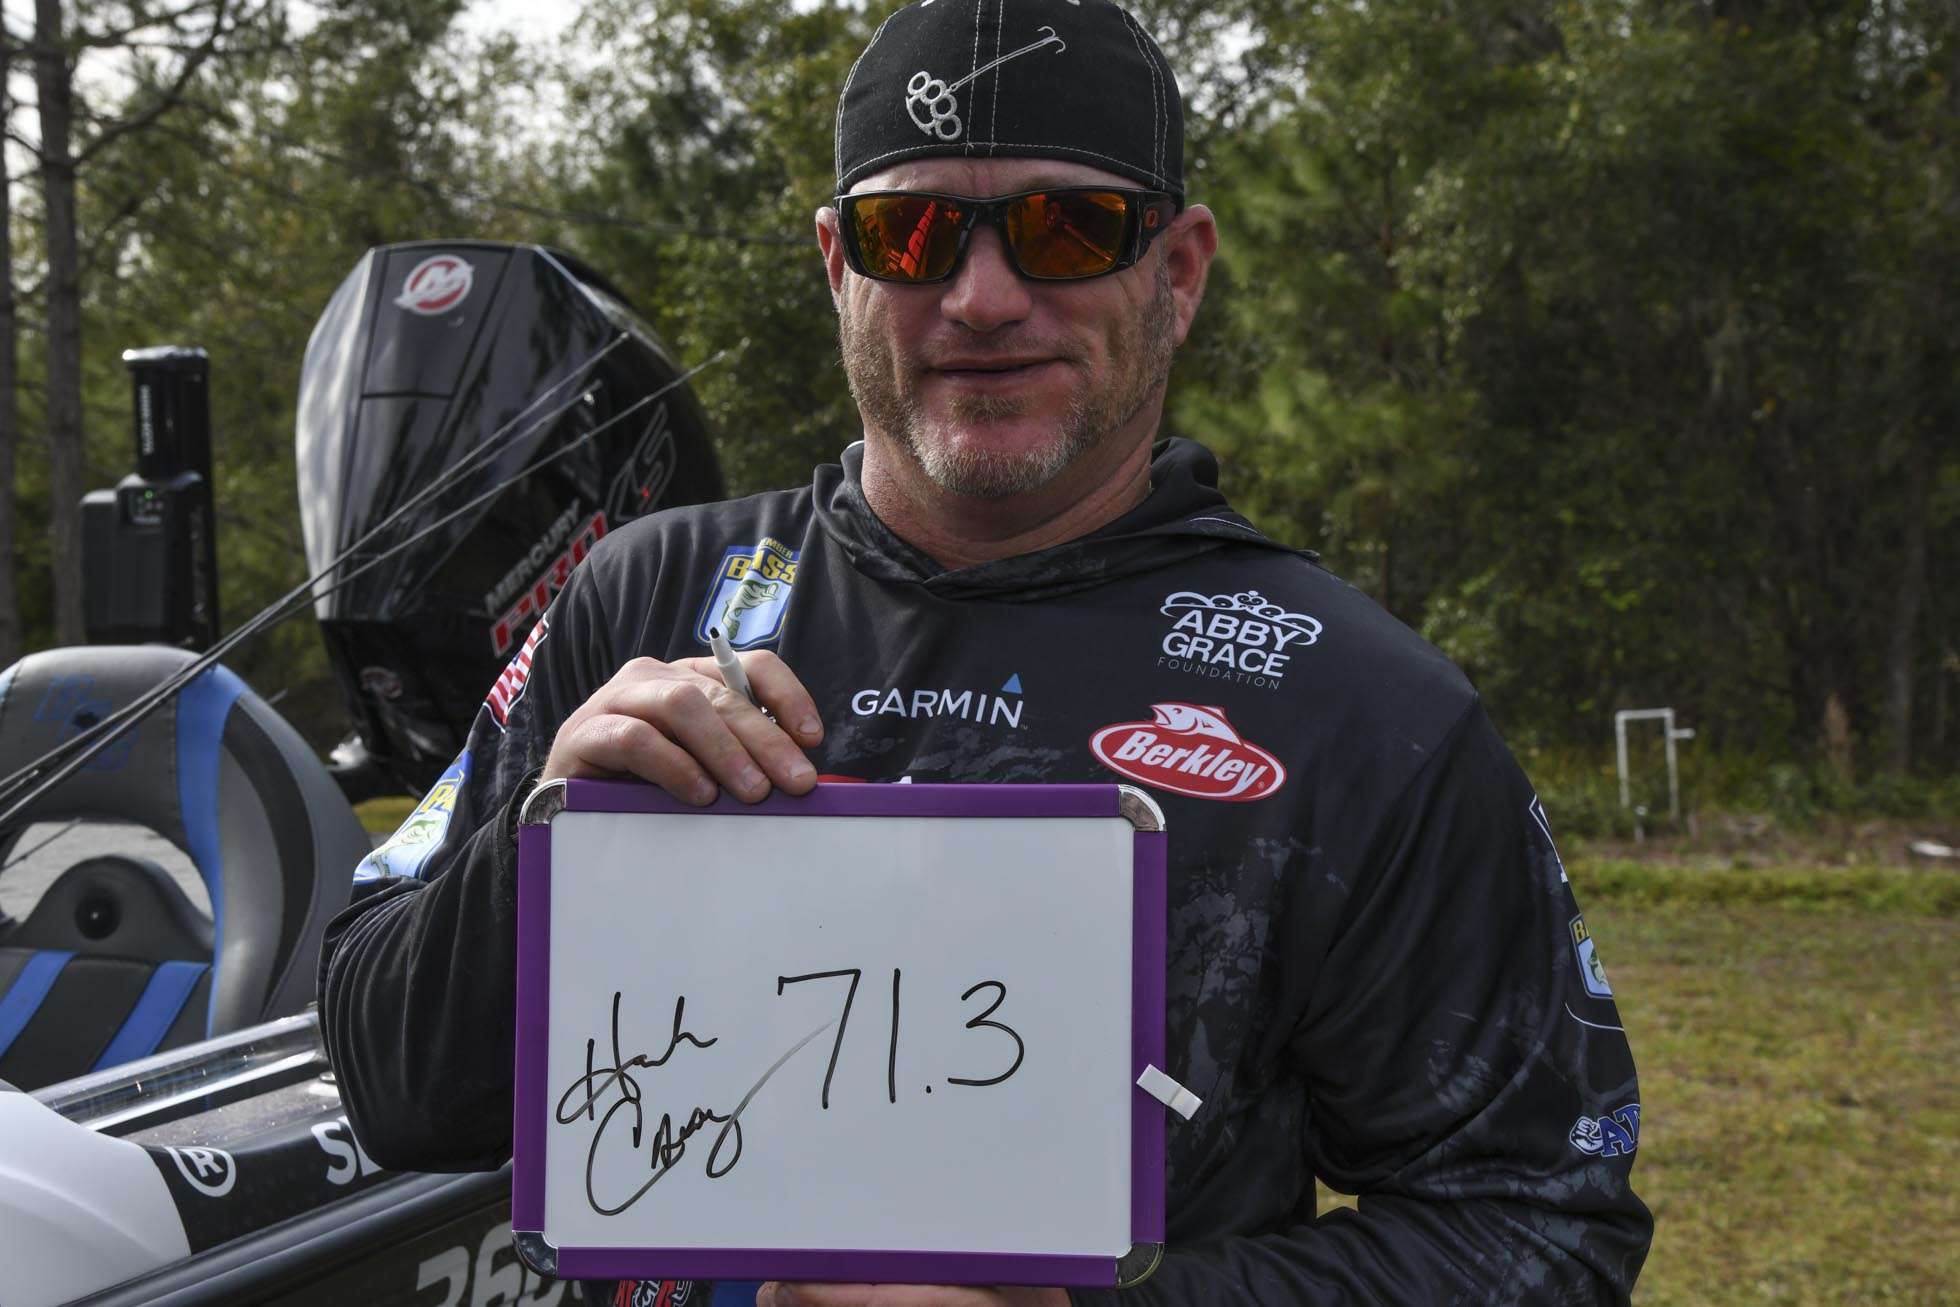 The Elites take a stab at what the winning weight will be this week at the 2020 AFTCO Bassmaster Elite at St. Johns River!